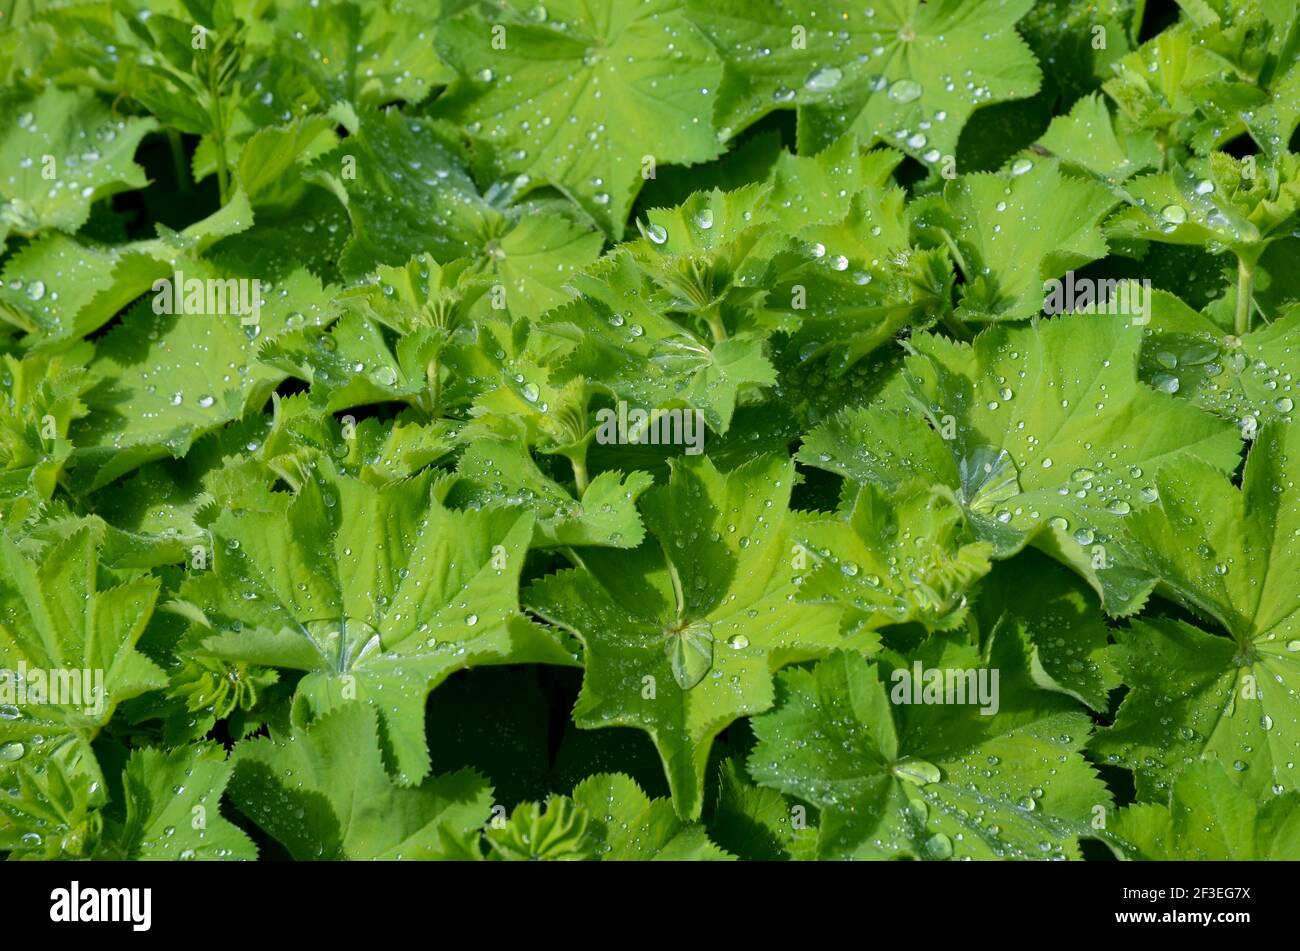 Raindrops on green leaves. The drops are like beads. The foliage comes alive with moisture. Stock Photo